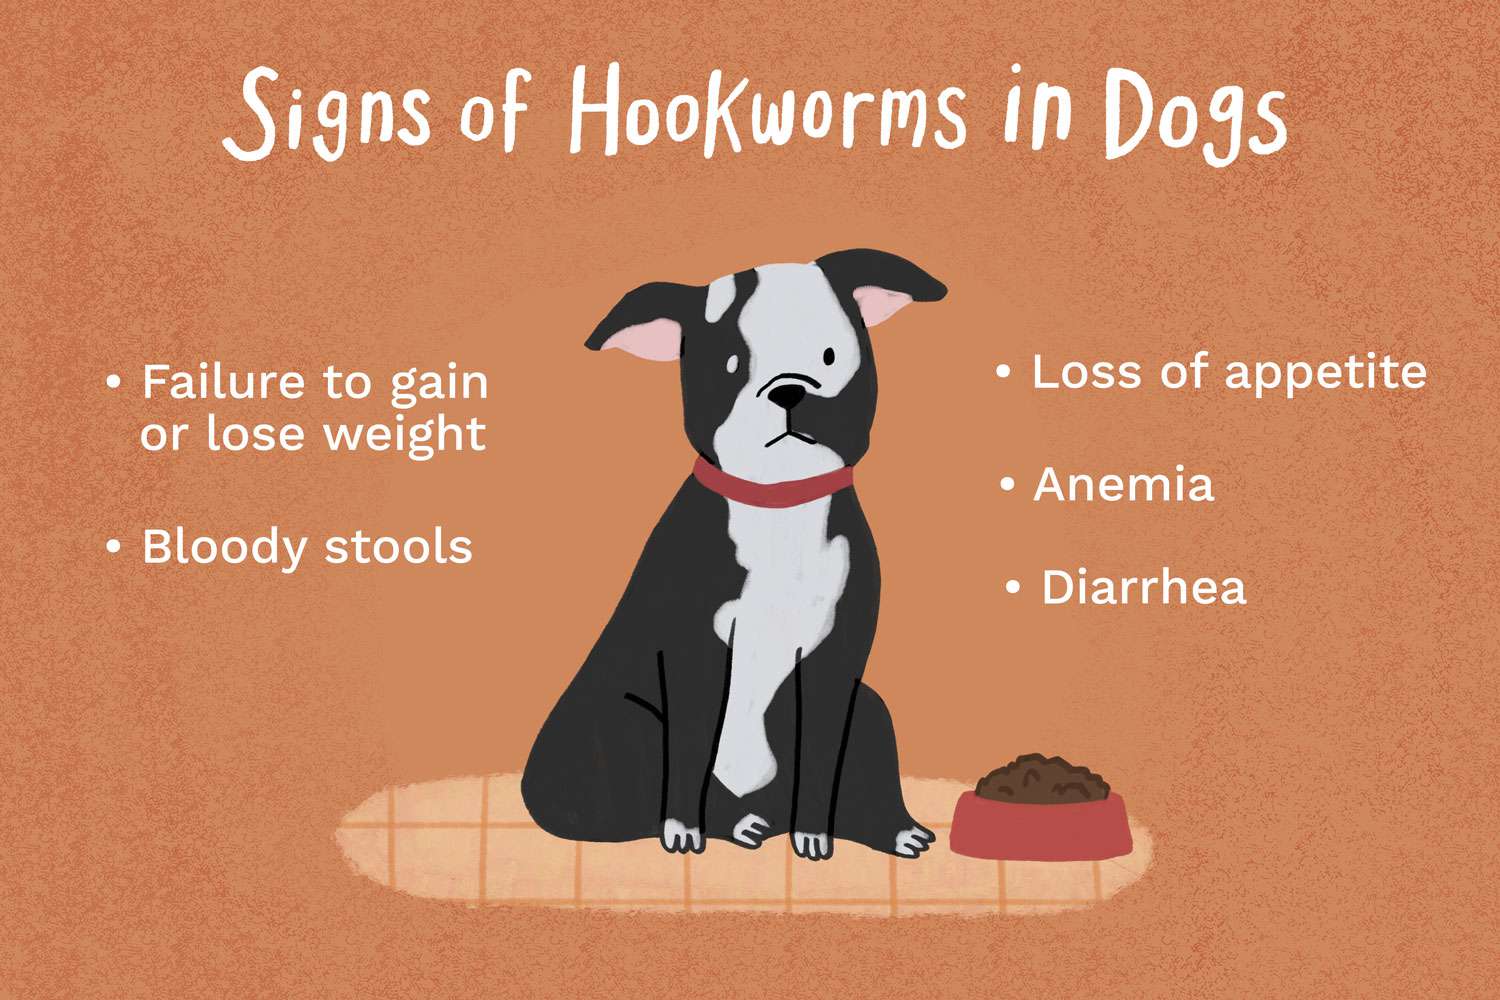 Illustration of signs of hookworms in dogs